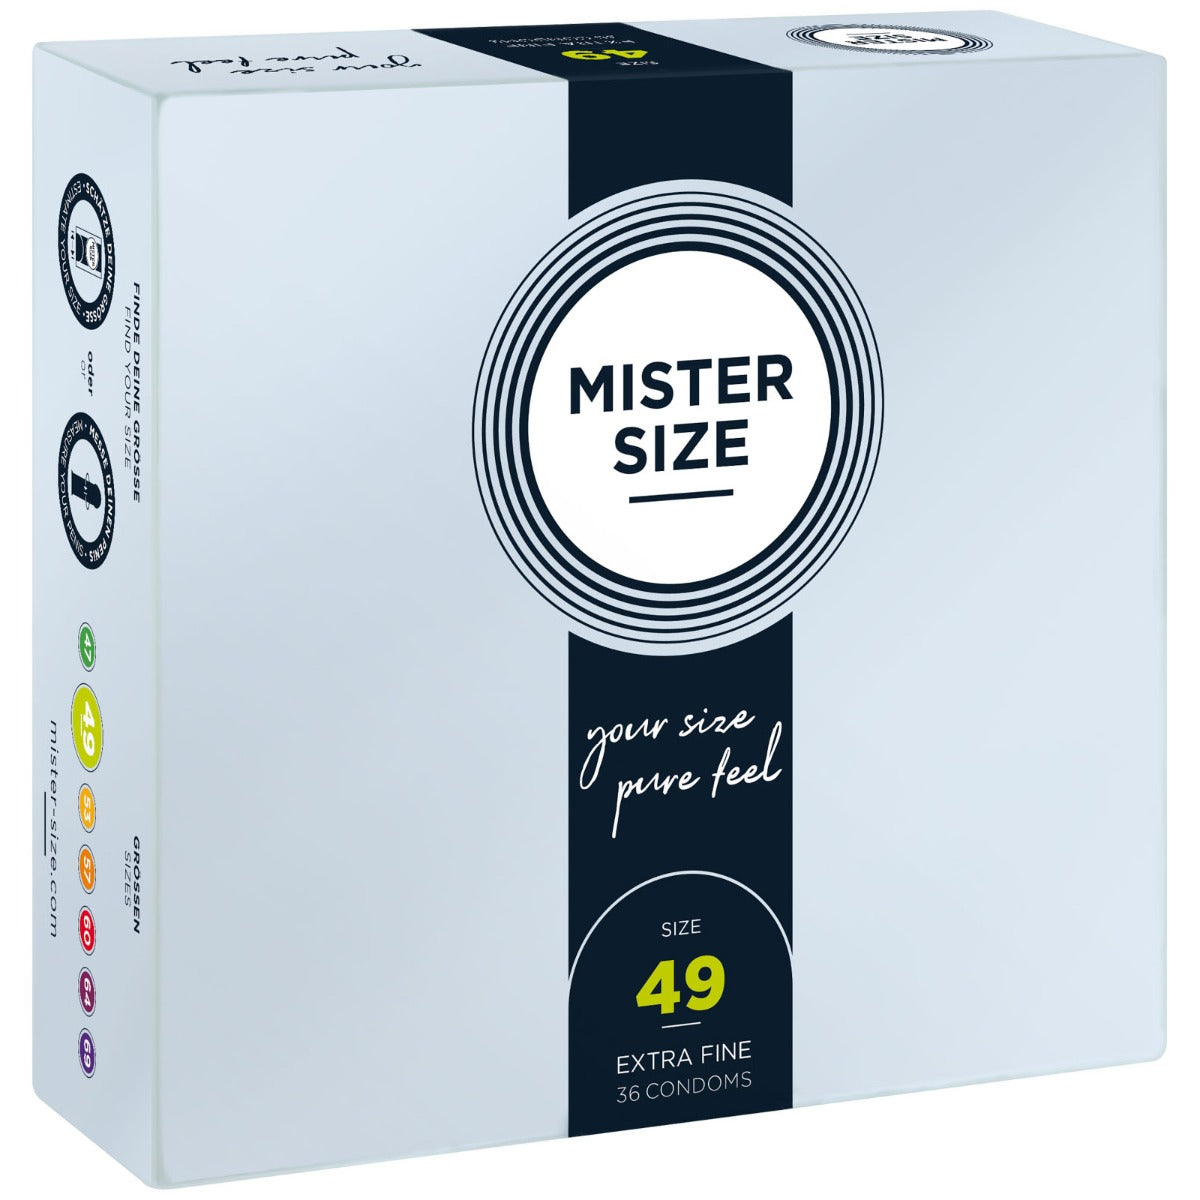 Condoms MISTER SIZE - pure feel condoms - size 49 mm (36 pack)   